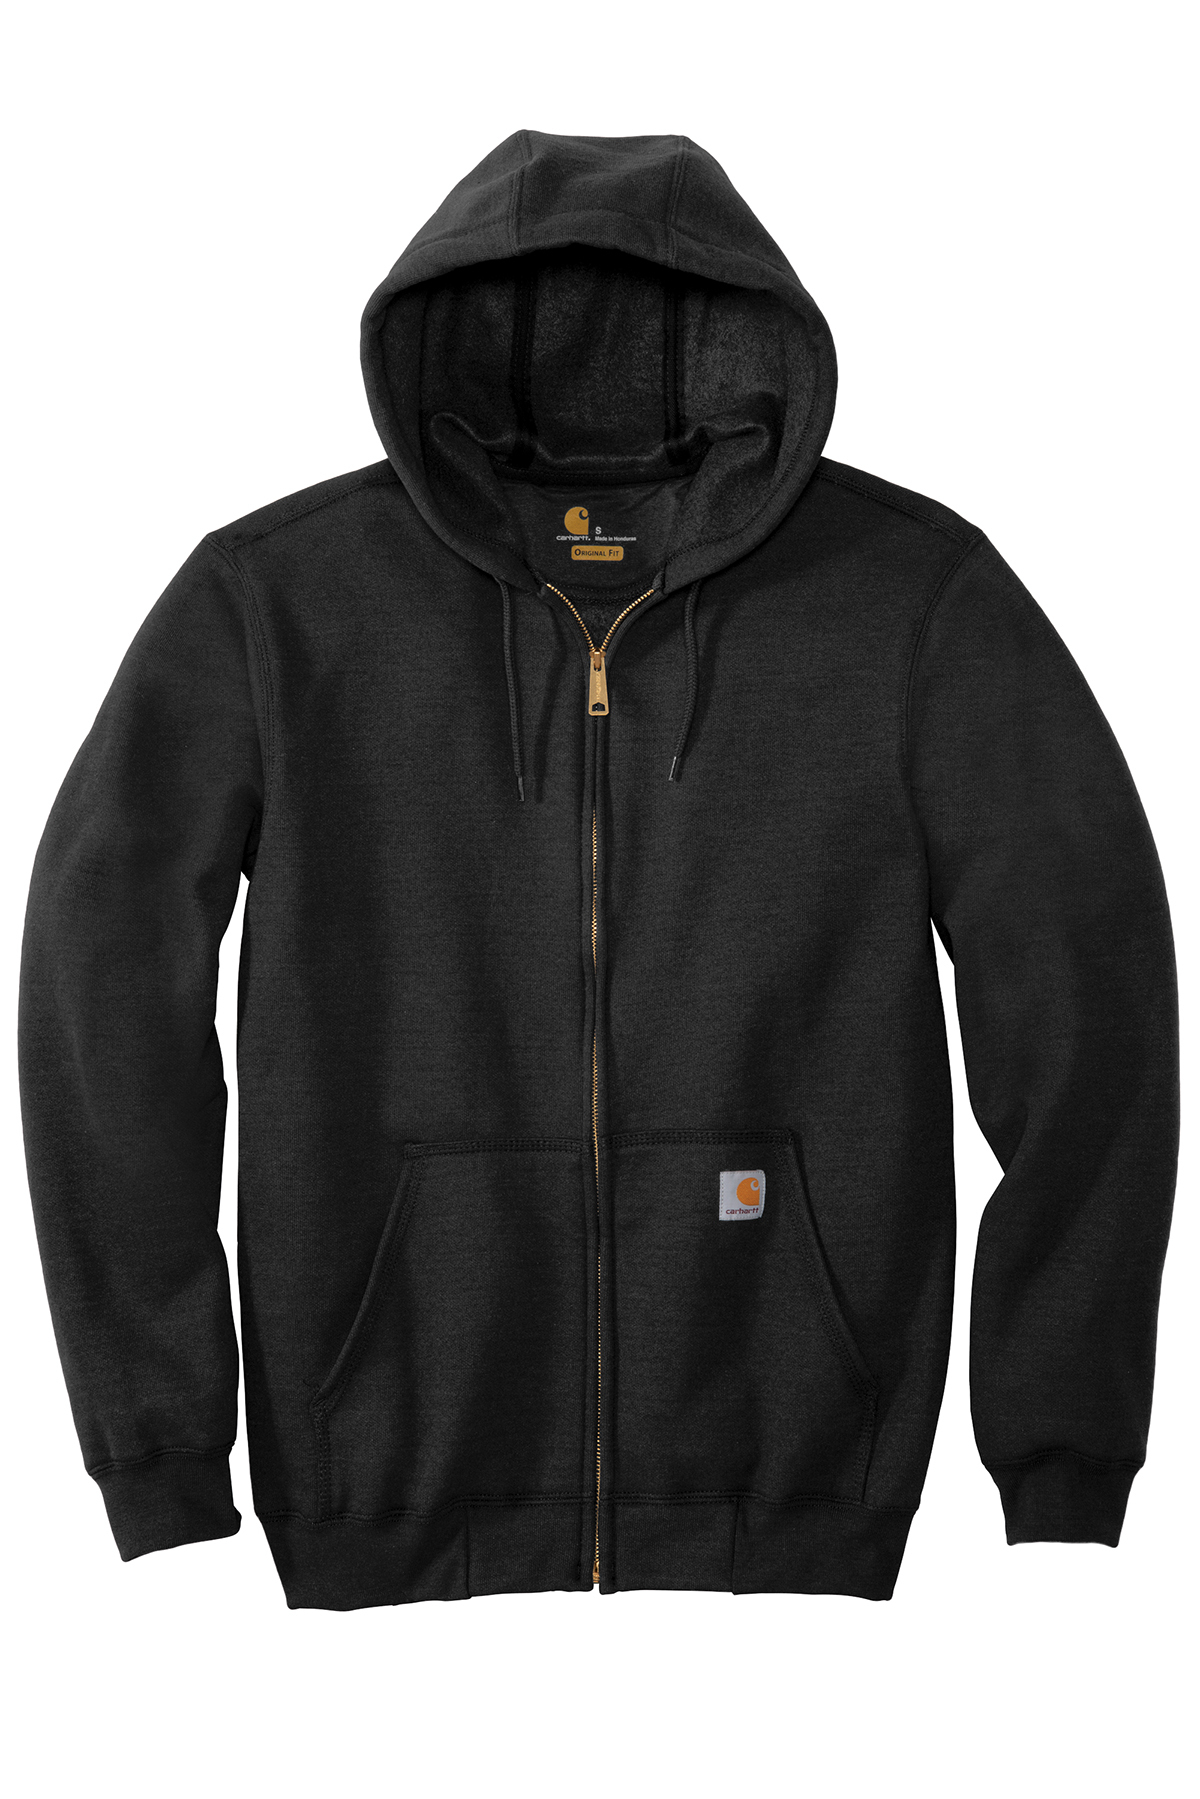 Carhartt Midweight Hooded Zip-Front Sweatshirt | Product | Company Casuals